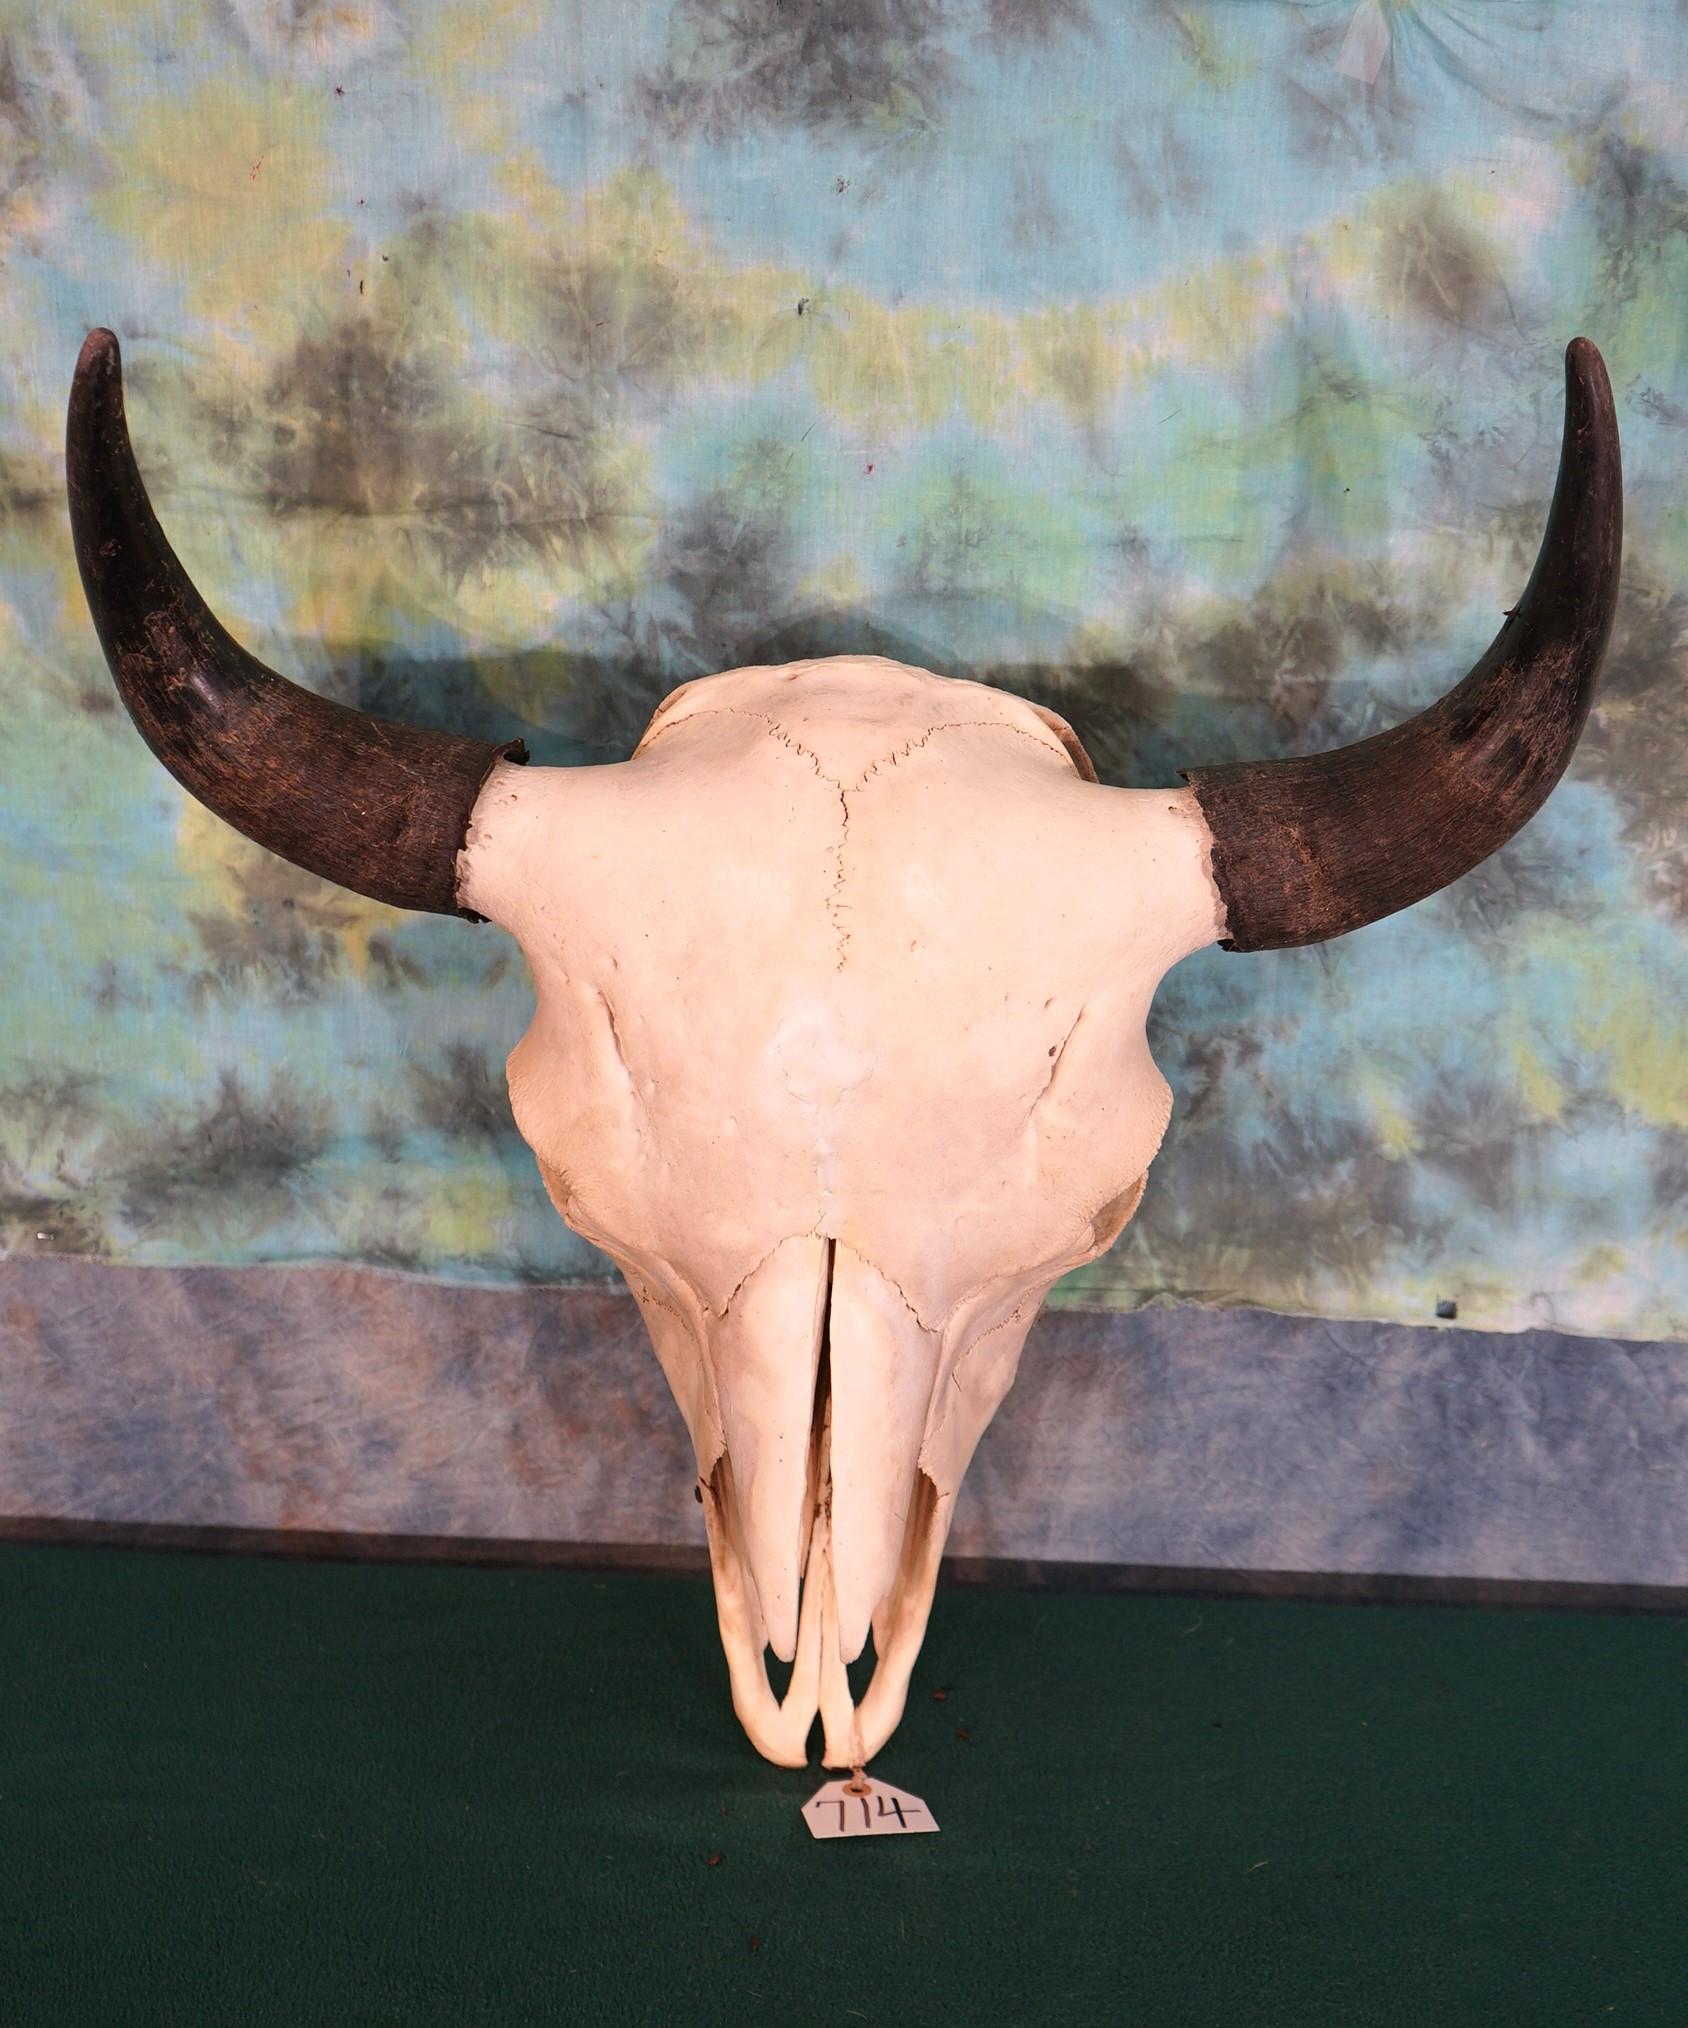 American Bison Skull Taxidermy